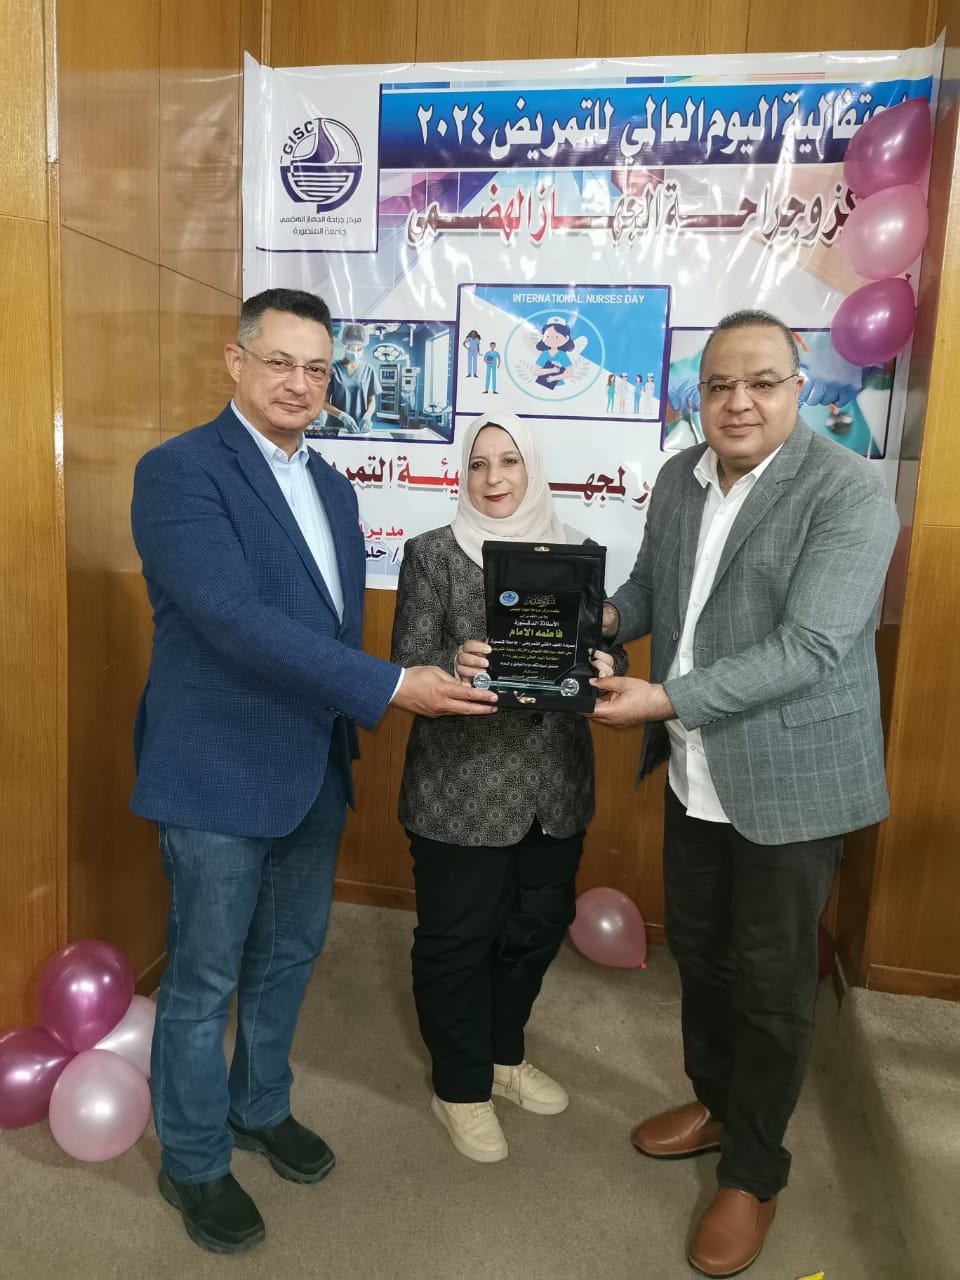 Professor Dr. Fatma El-Emam was honored by Professor Dr. Helmy Azzat, Director of the Gastrointestinal Surgery Center, and Professor Dr. Hossam Ghazi, Director of Mansoura University Hospitals, on the occasion of International Nurses Day. 